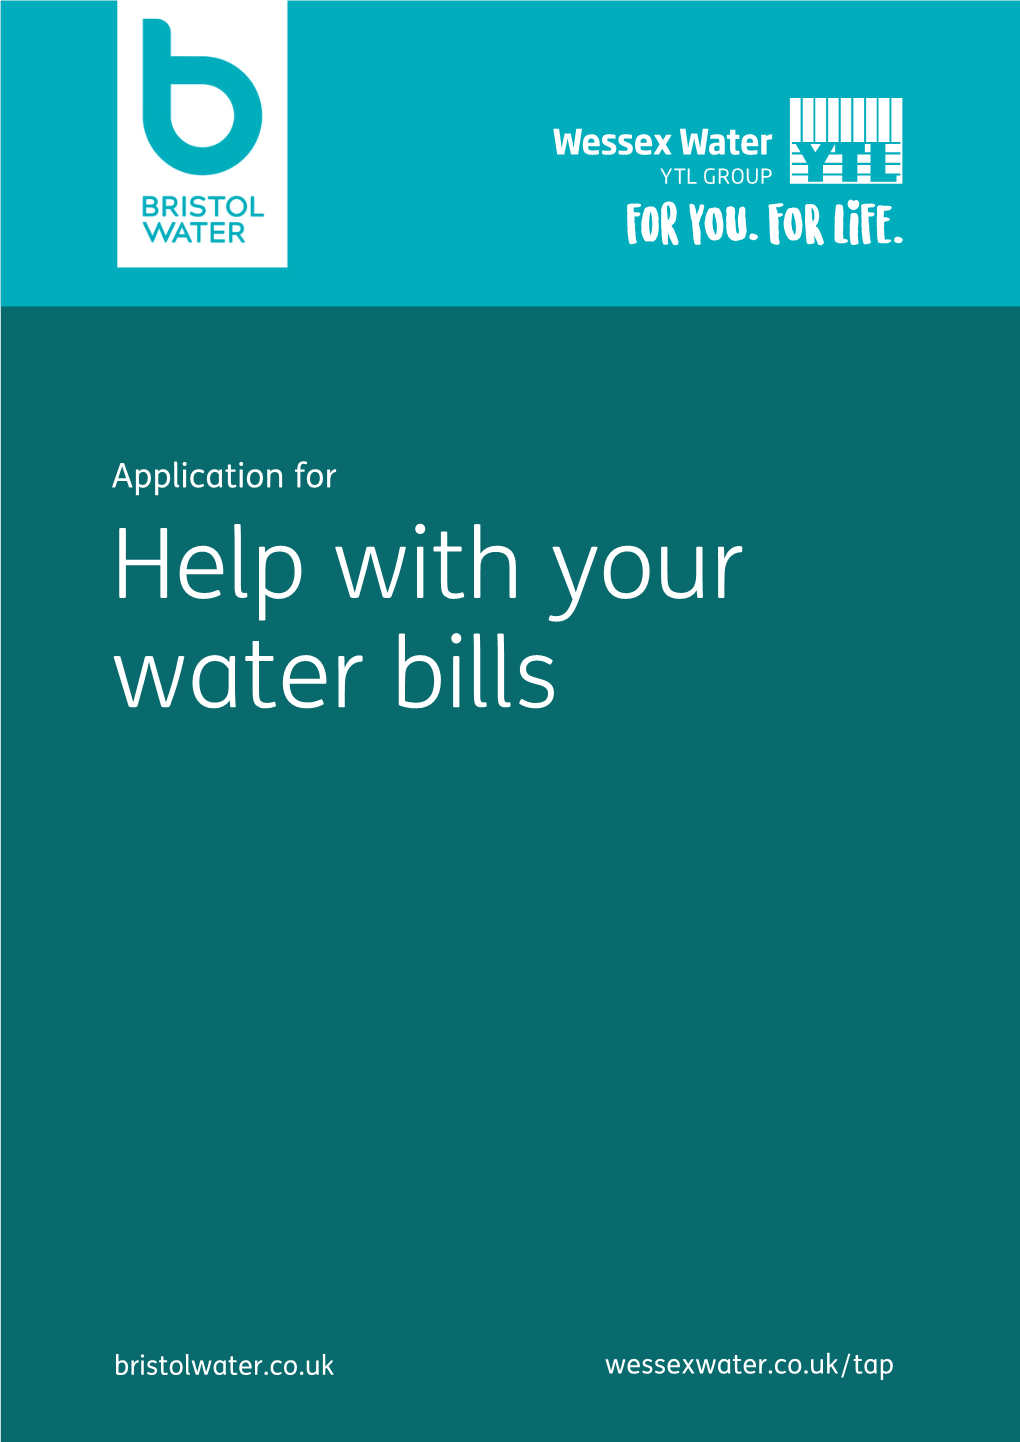 Application for Help with Your Water Bills (Bristol Water